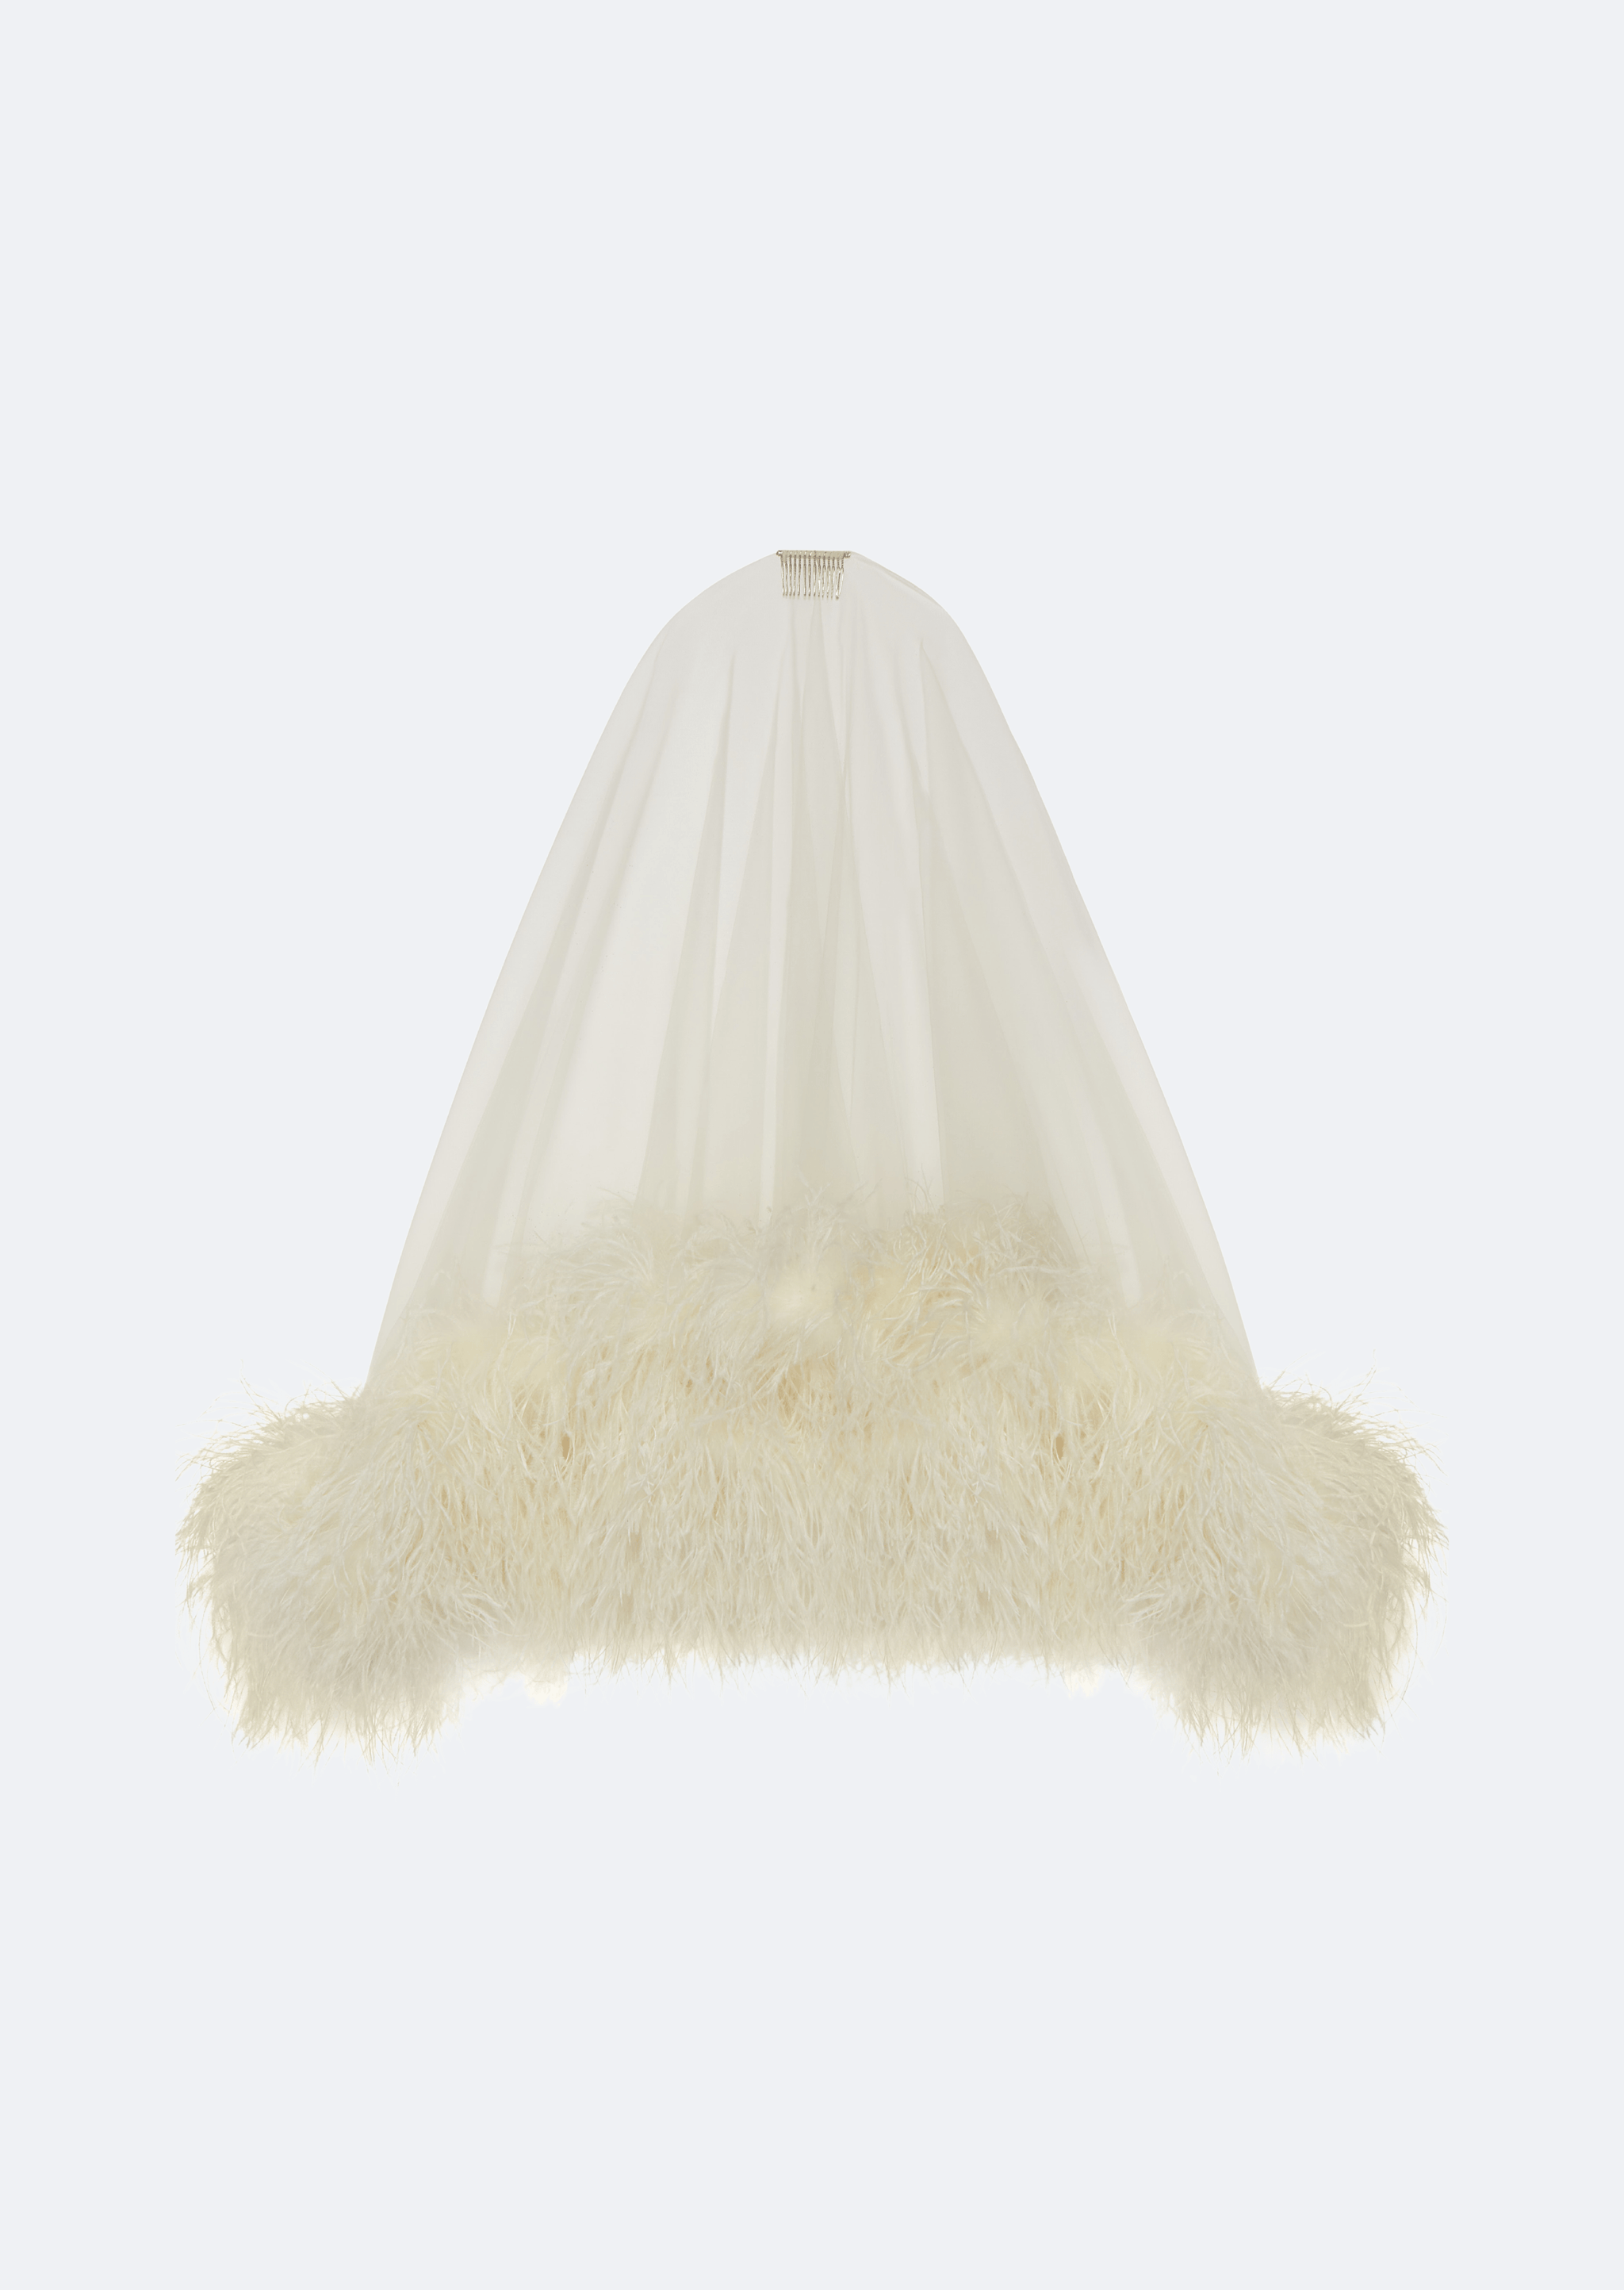 Tulle Veil With Feathers - LAPOINTE